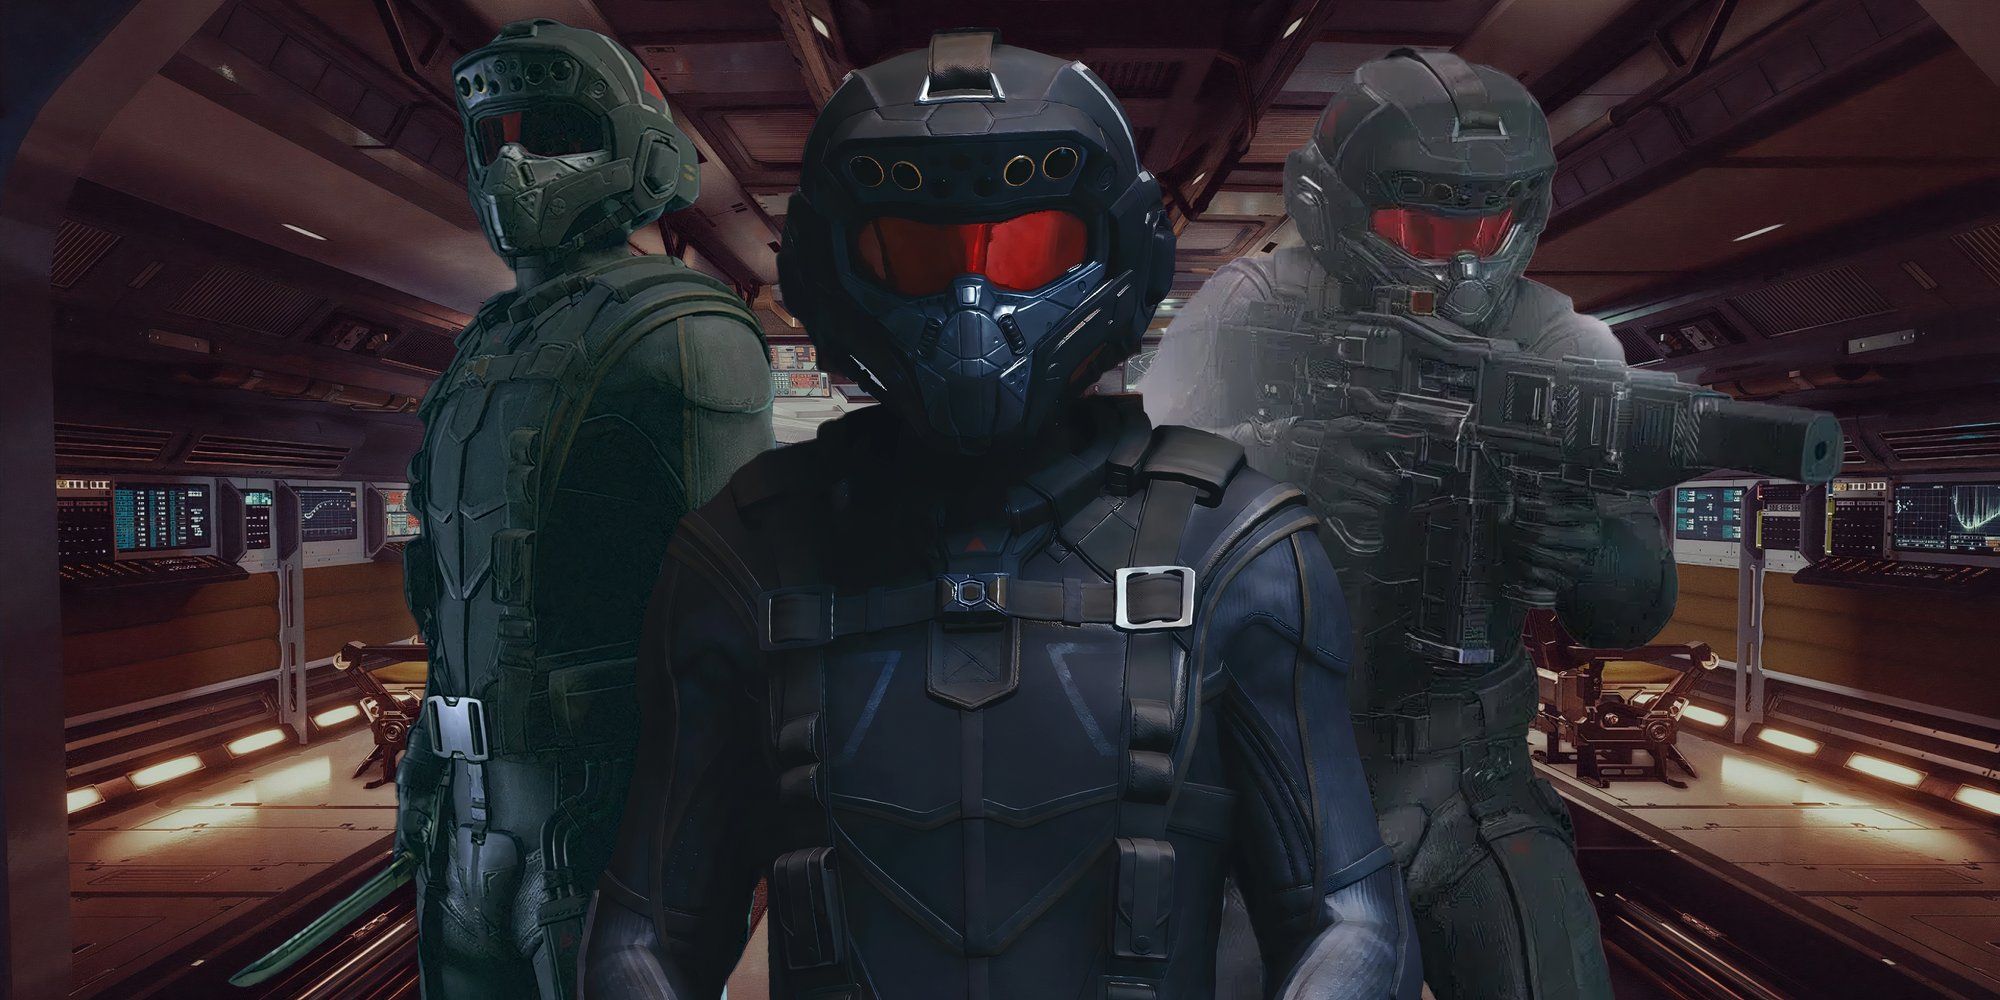 Starfield's Stealth Operative Suit with a knife, a gun and unarmed looking into the camera on a spaceship